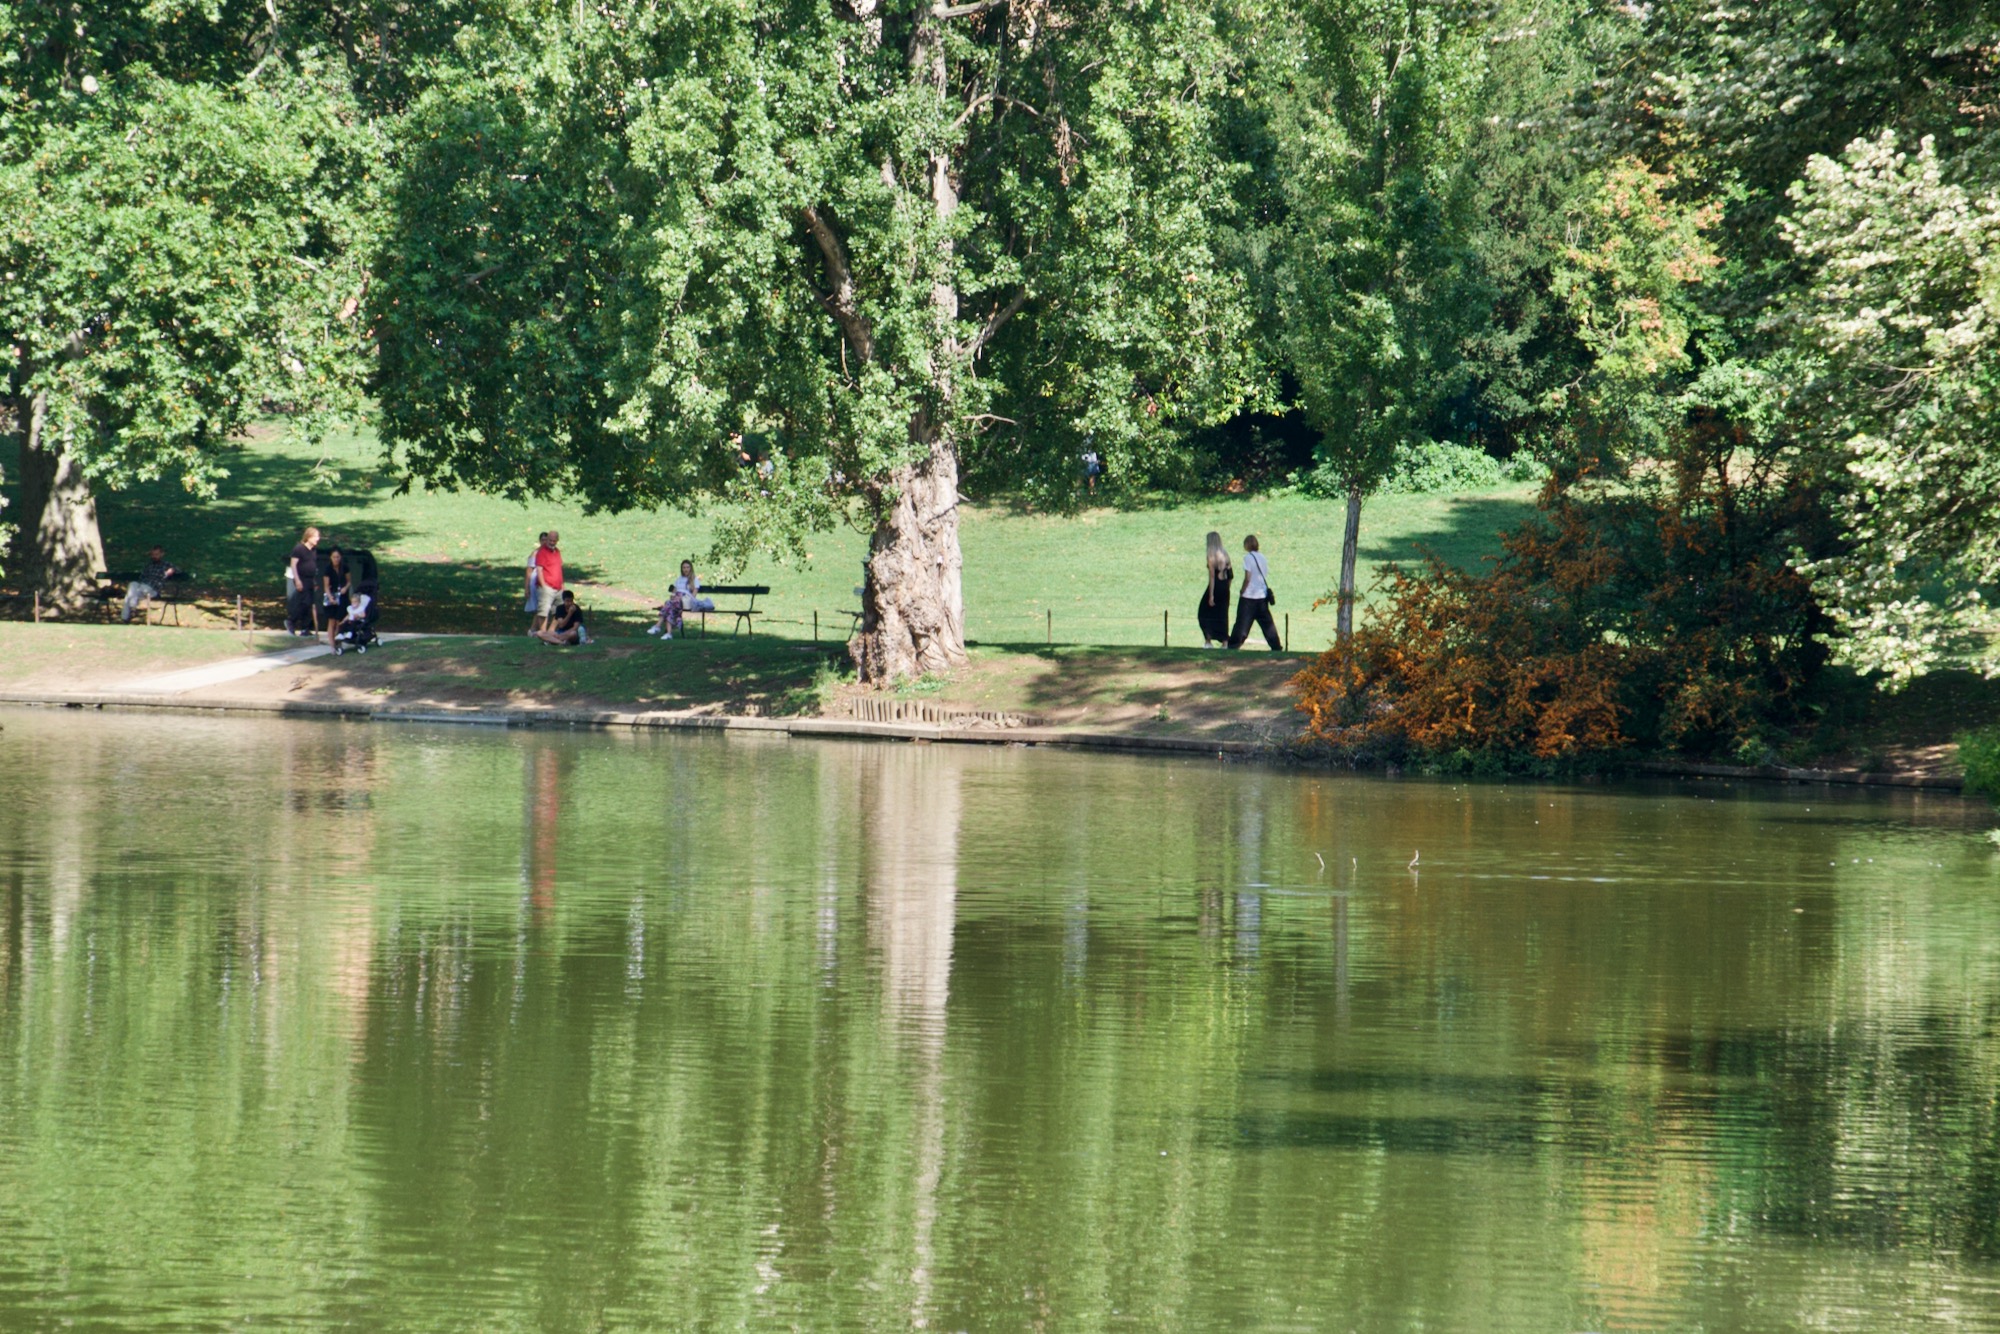 People walking under a tree across the river